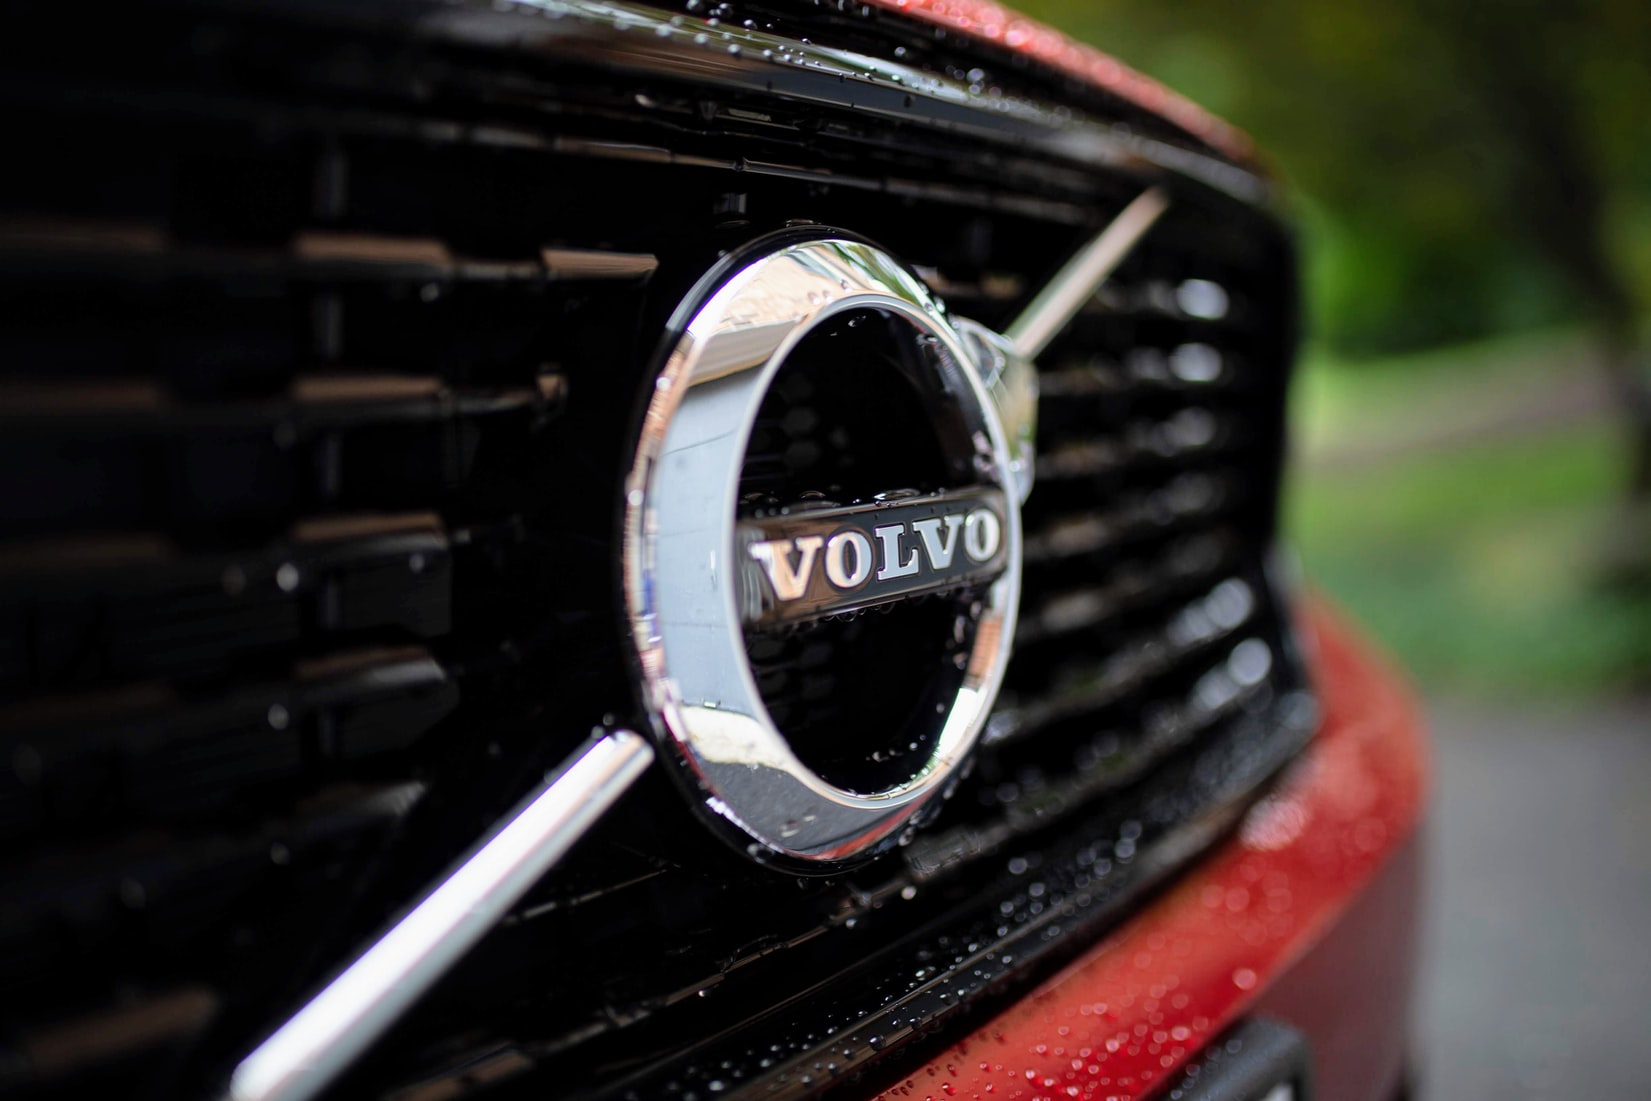 Volvo makes a way out for the internal combustion engine on a fully electricized road